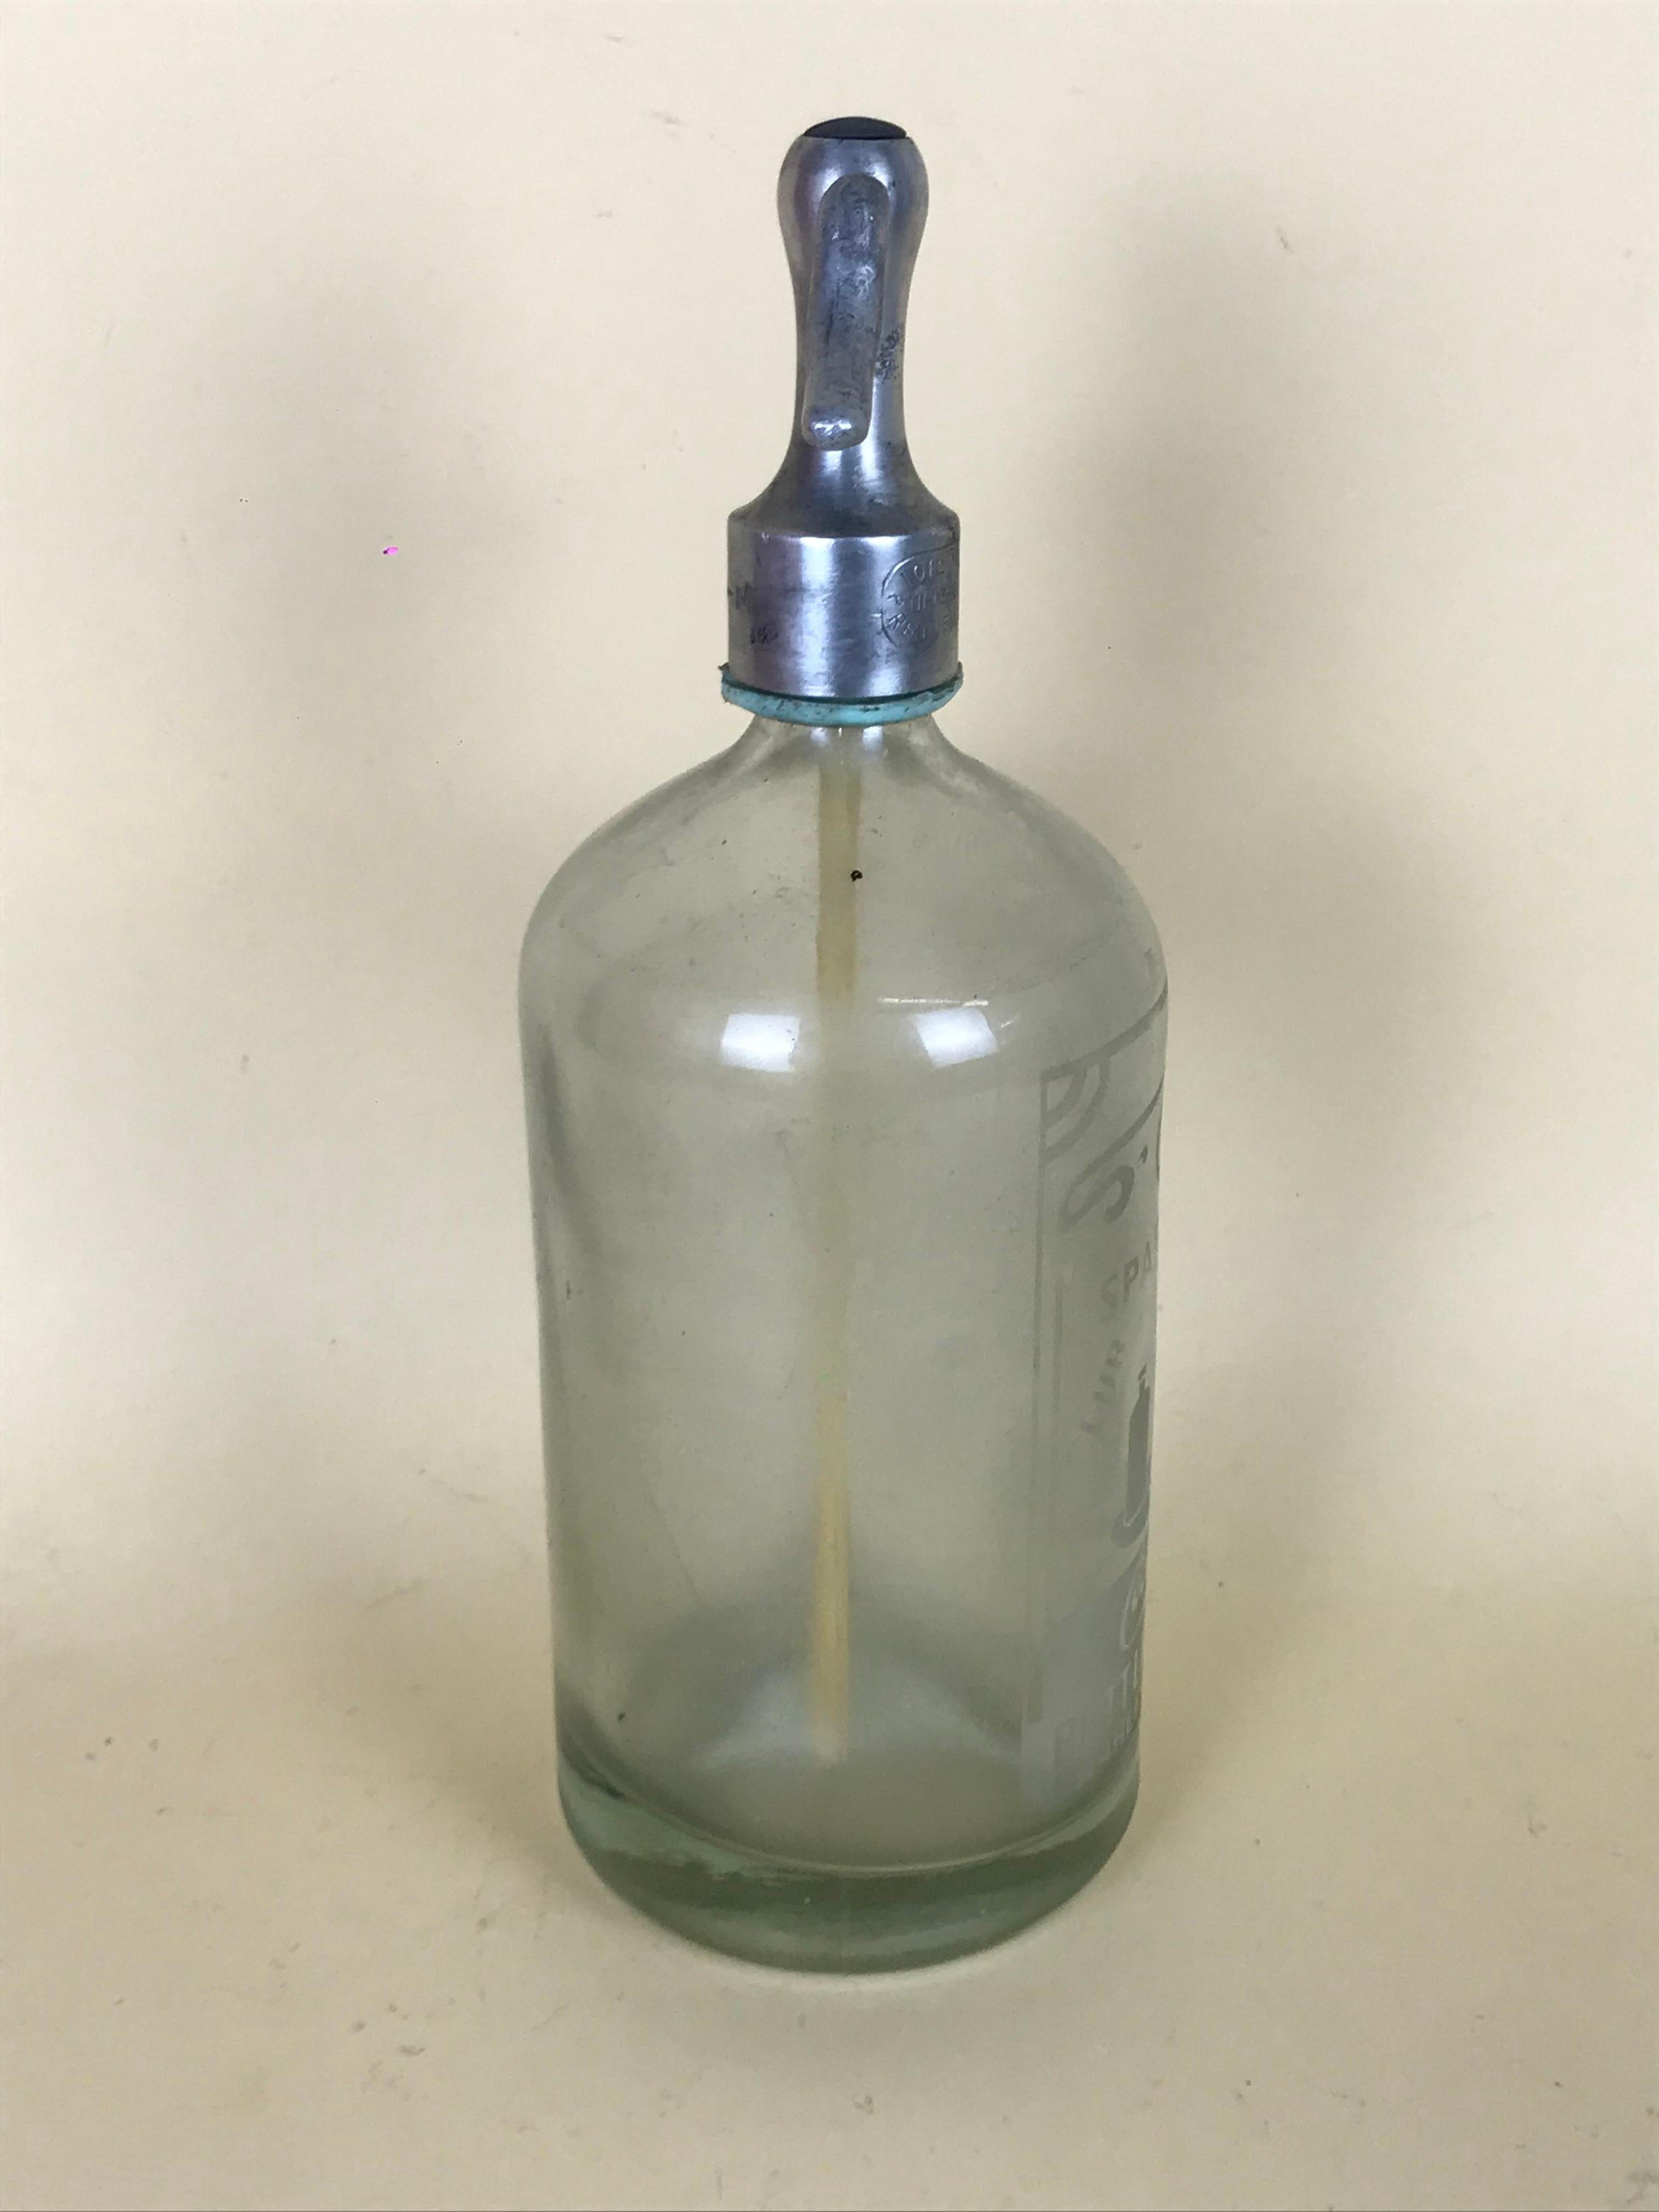 1920s American Advertising Glass Syphon Coca-Cola Acid Etched Bar Bottle Seltzer For Sale 1